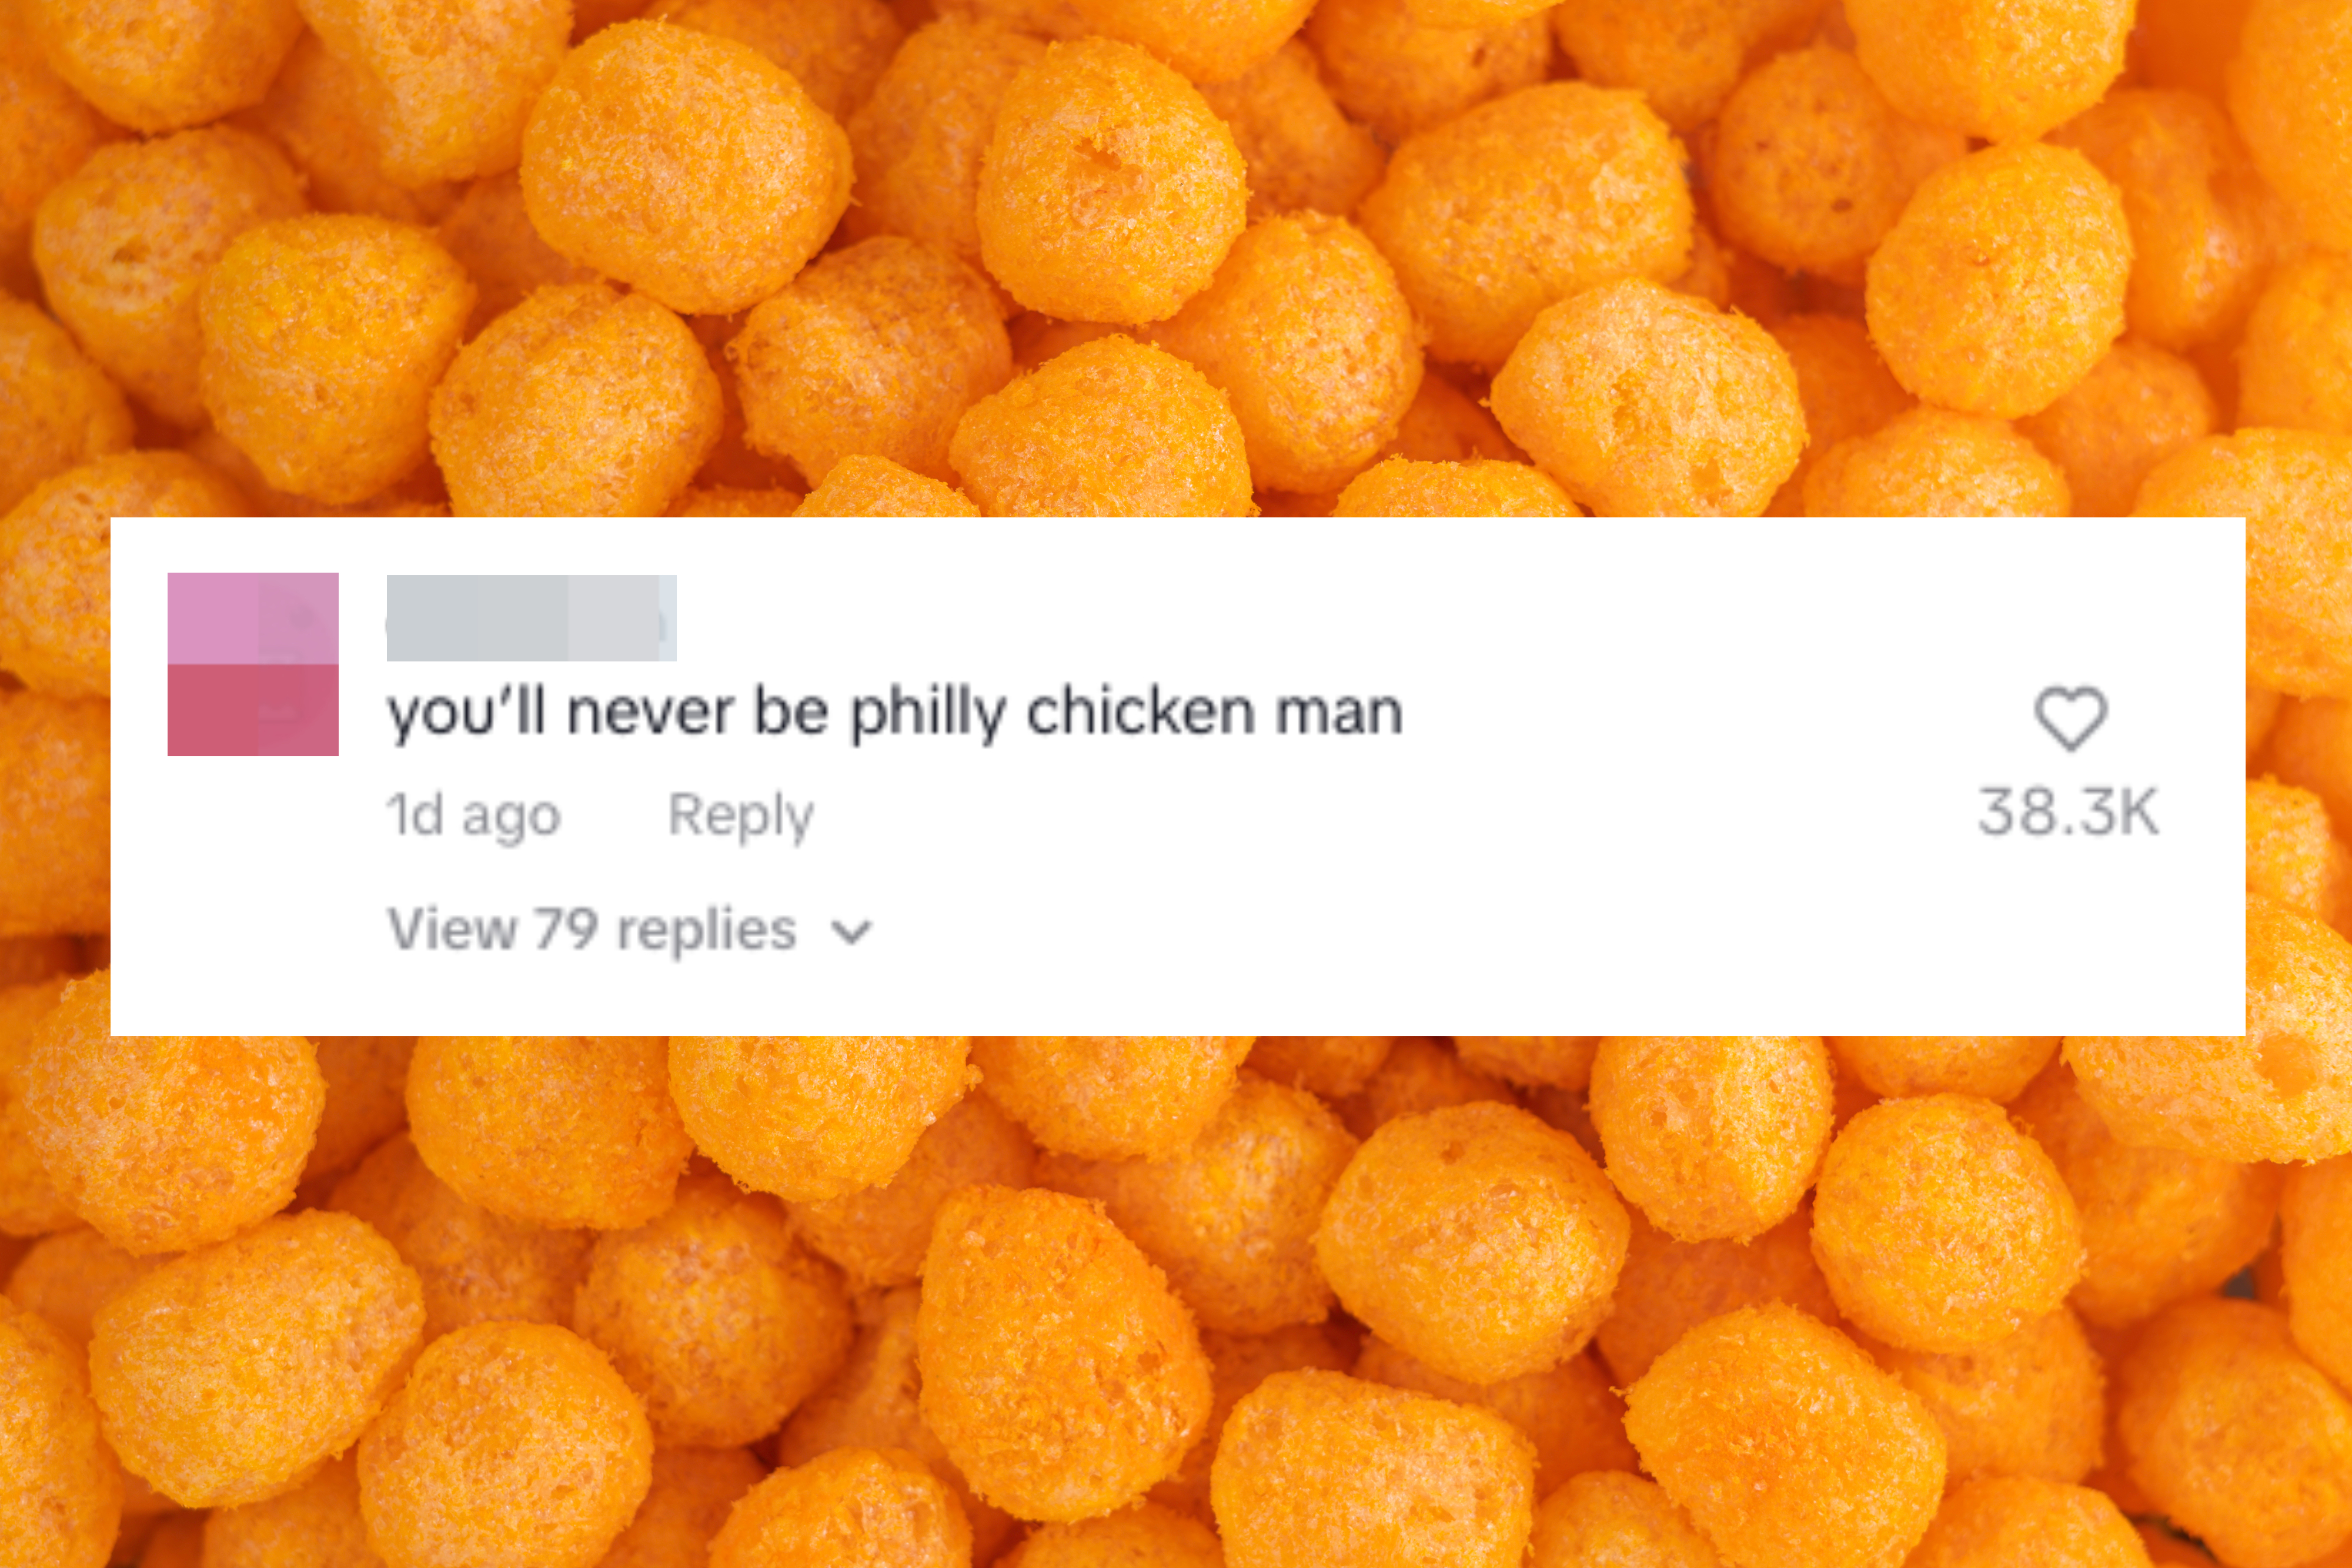 Numerous orange cheese puffs in close-up view